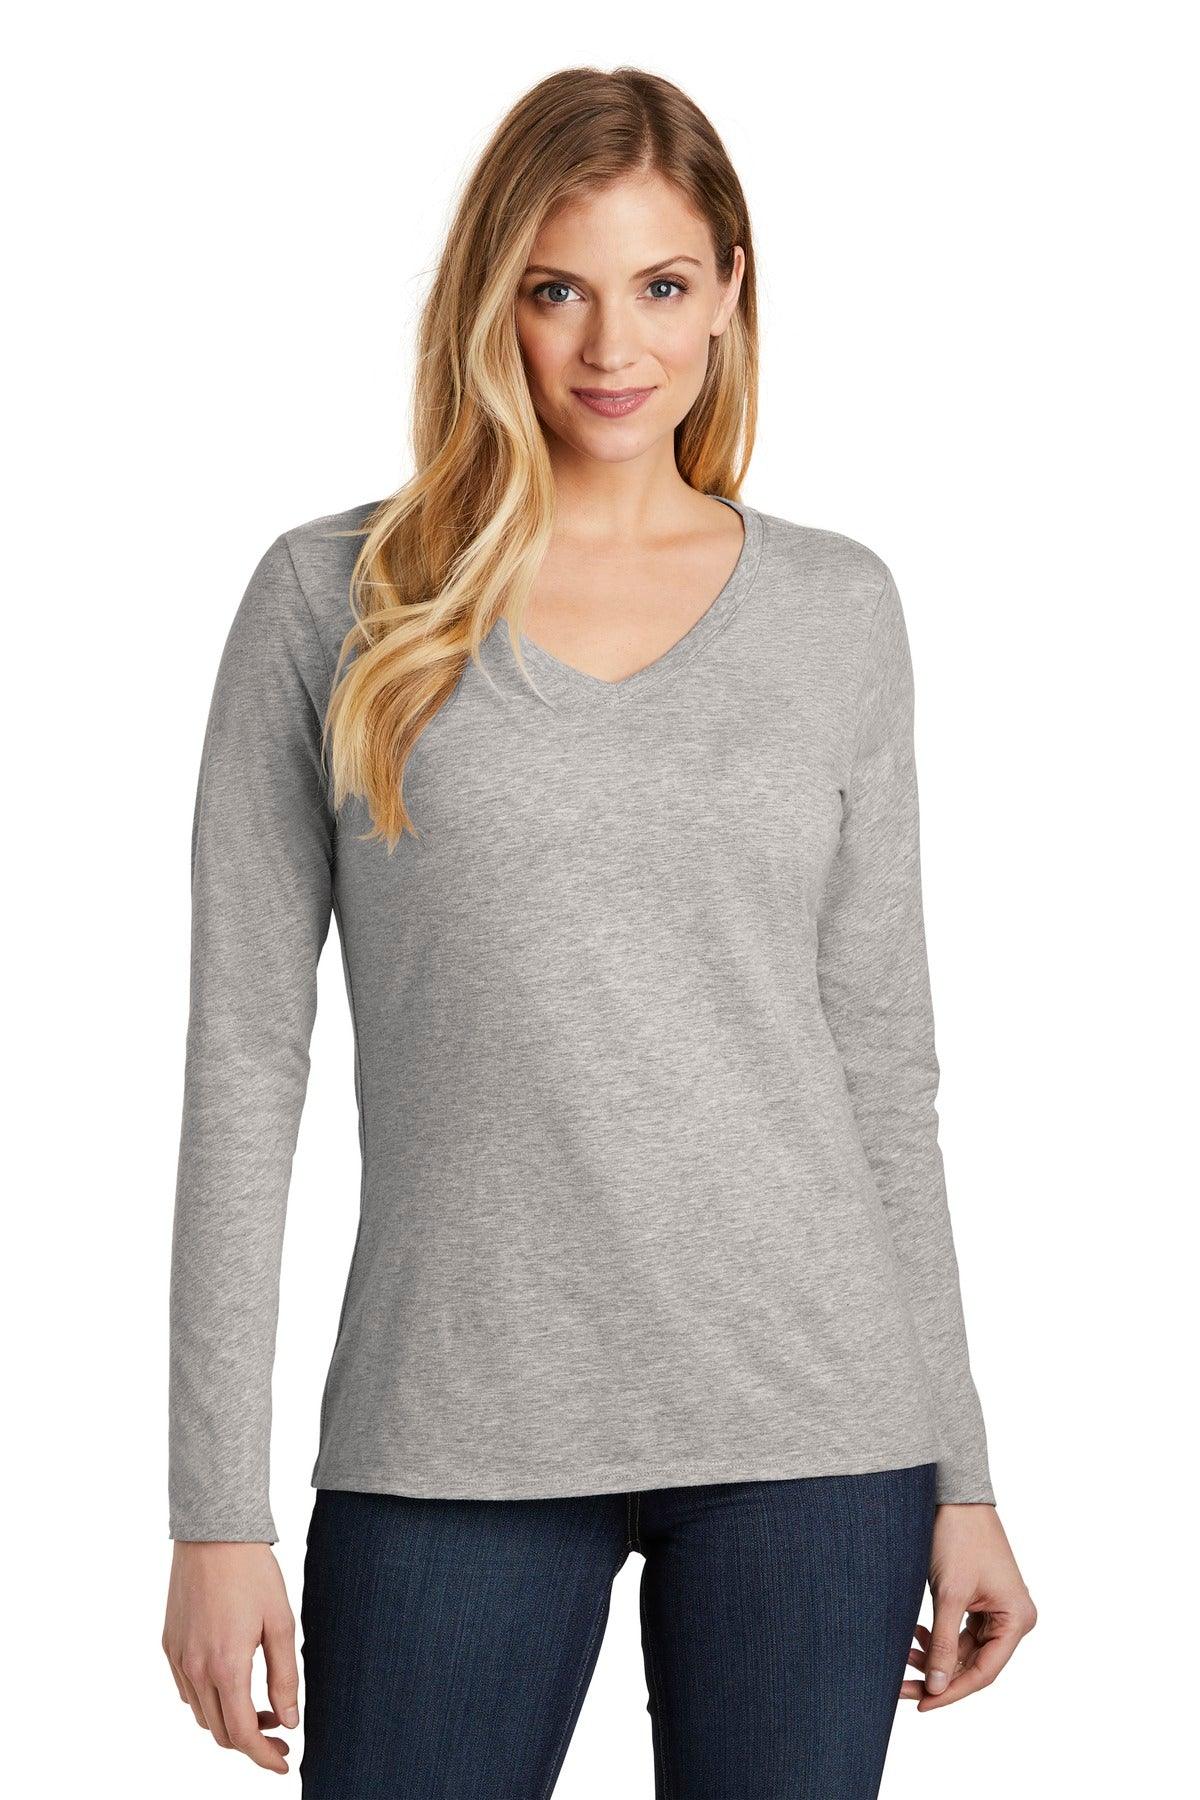 District Women's Very Important Tee Long Sleeve V-Neck. DT6201 - Dresses Max